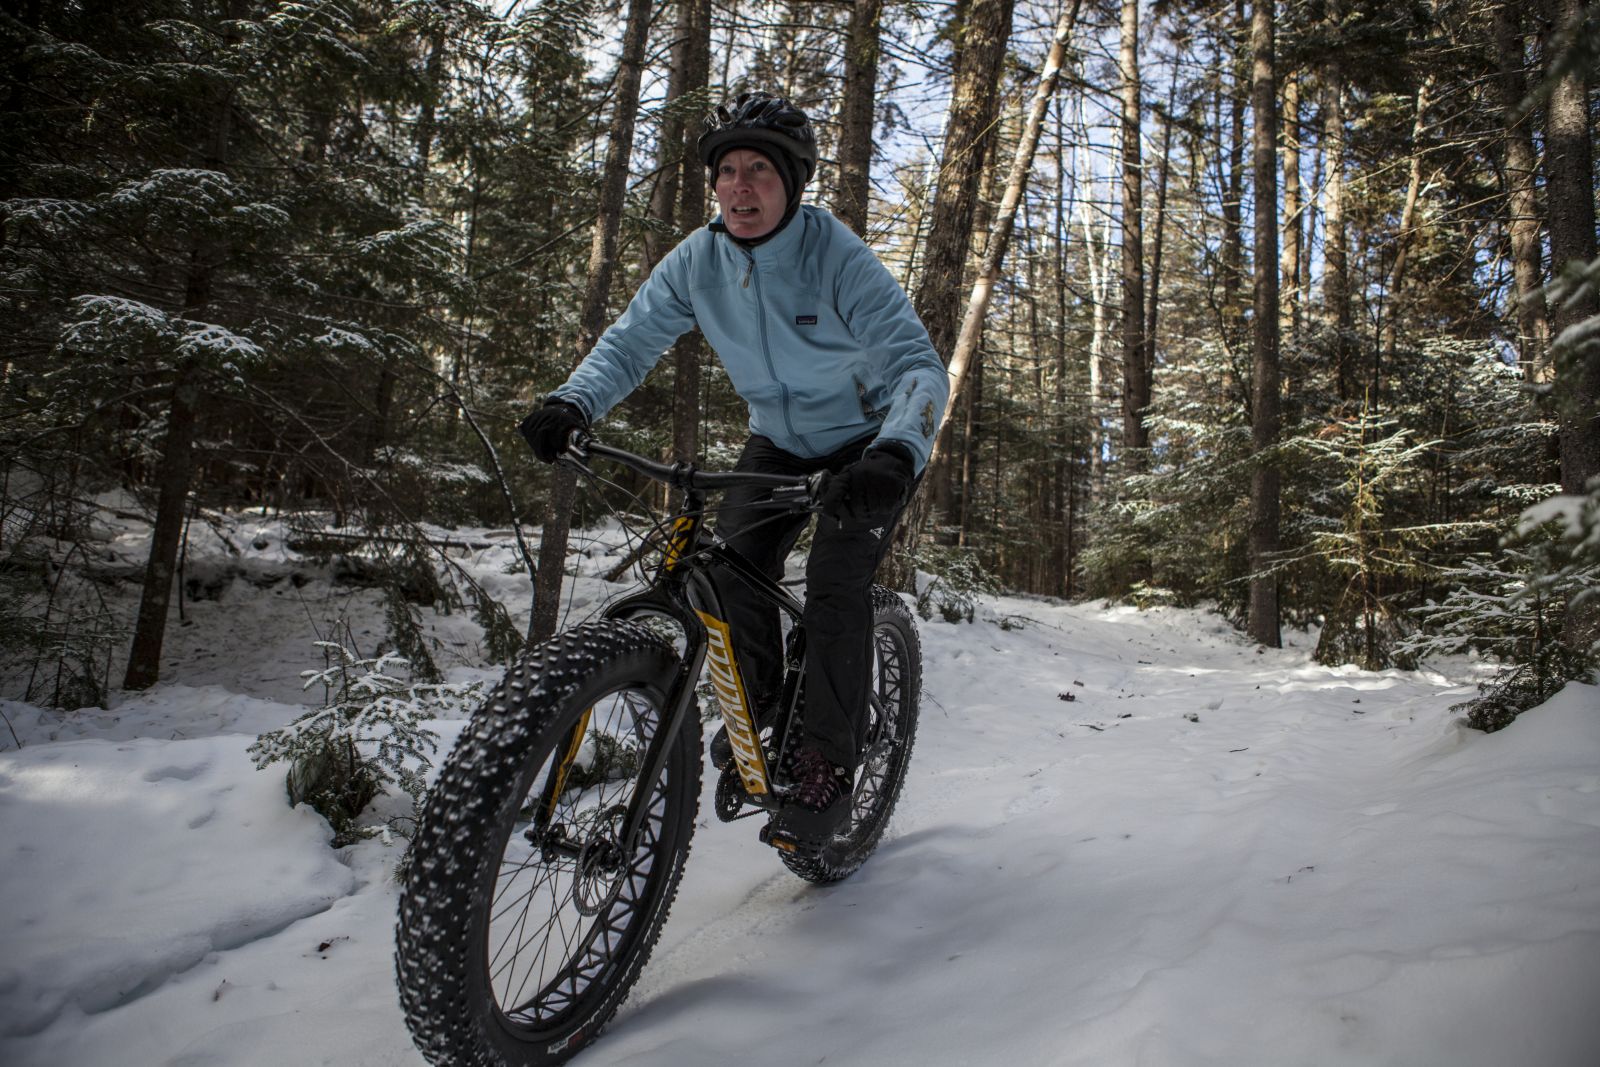 Hit the snowy trails on two-wheels this year!